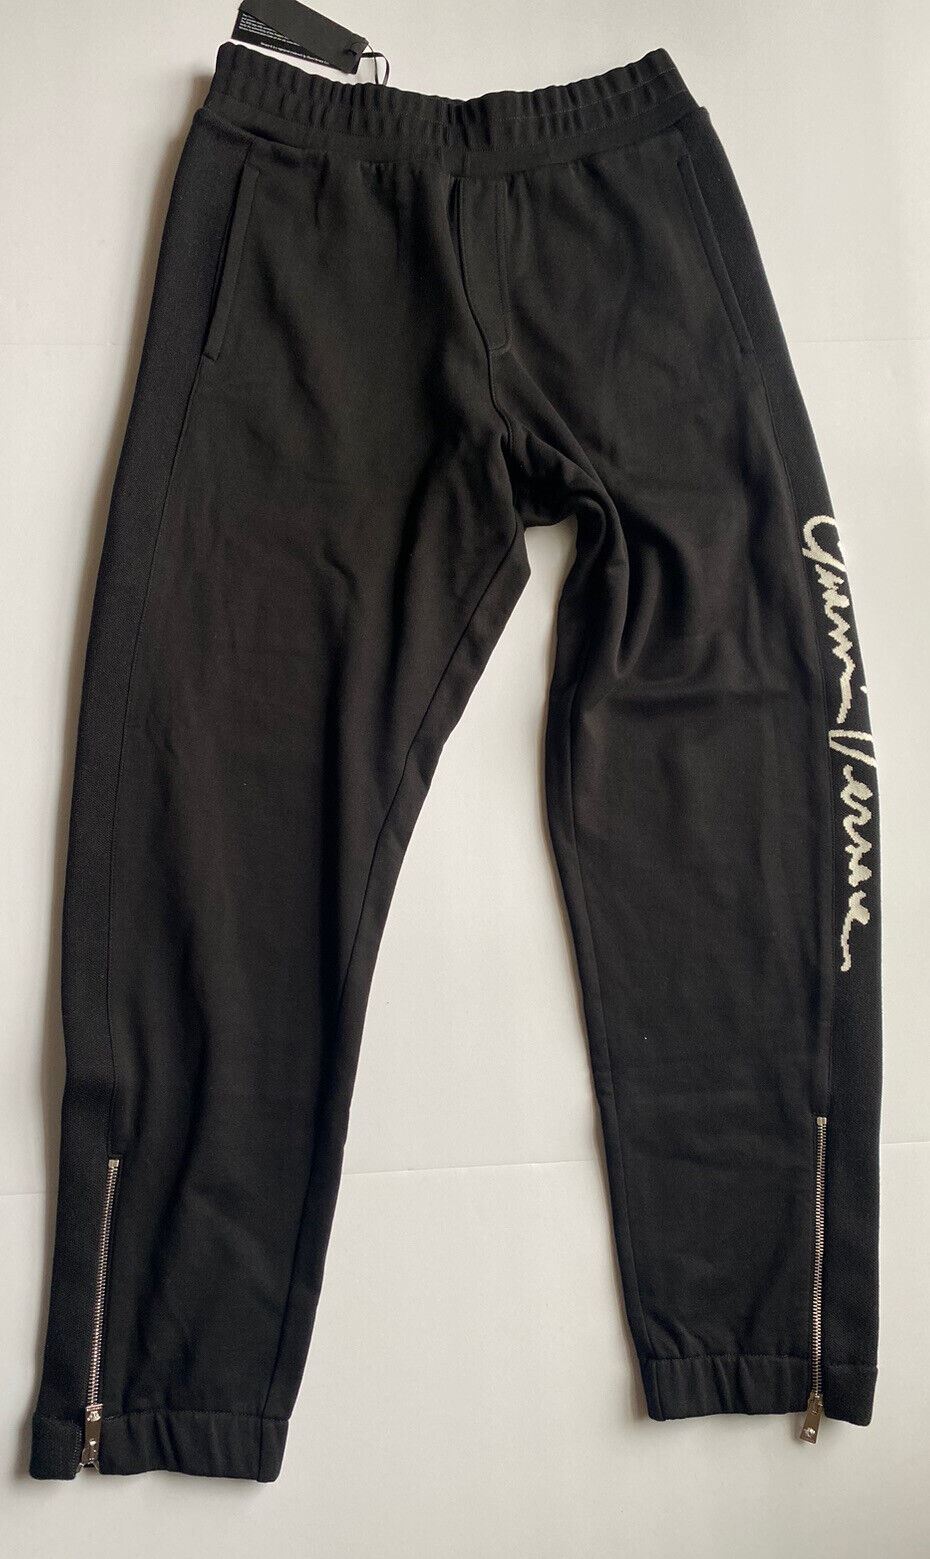 NWT $850 Versace Men's Black Mitchel Fit Pants Size Small Made in Italy A86887